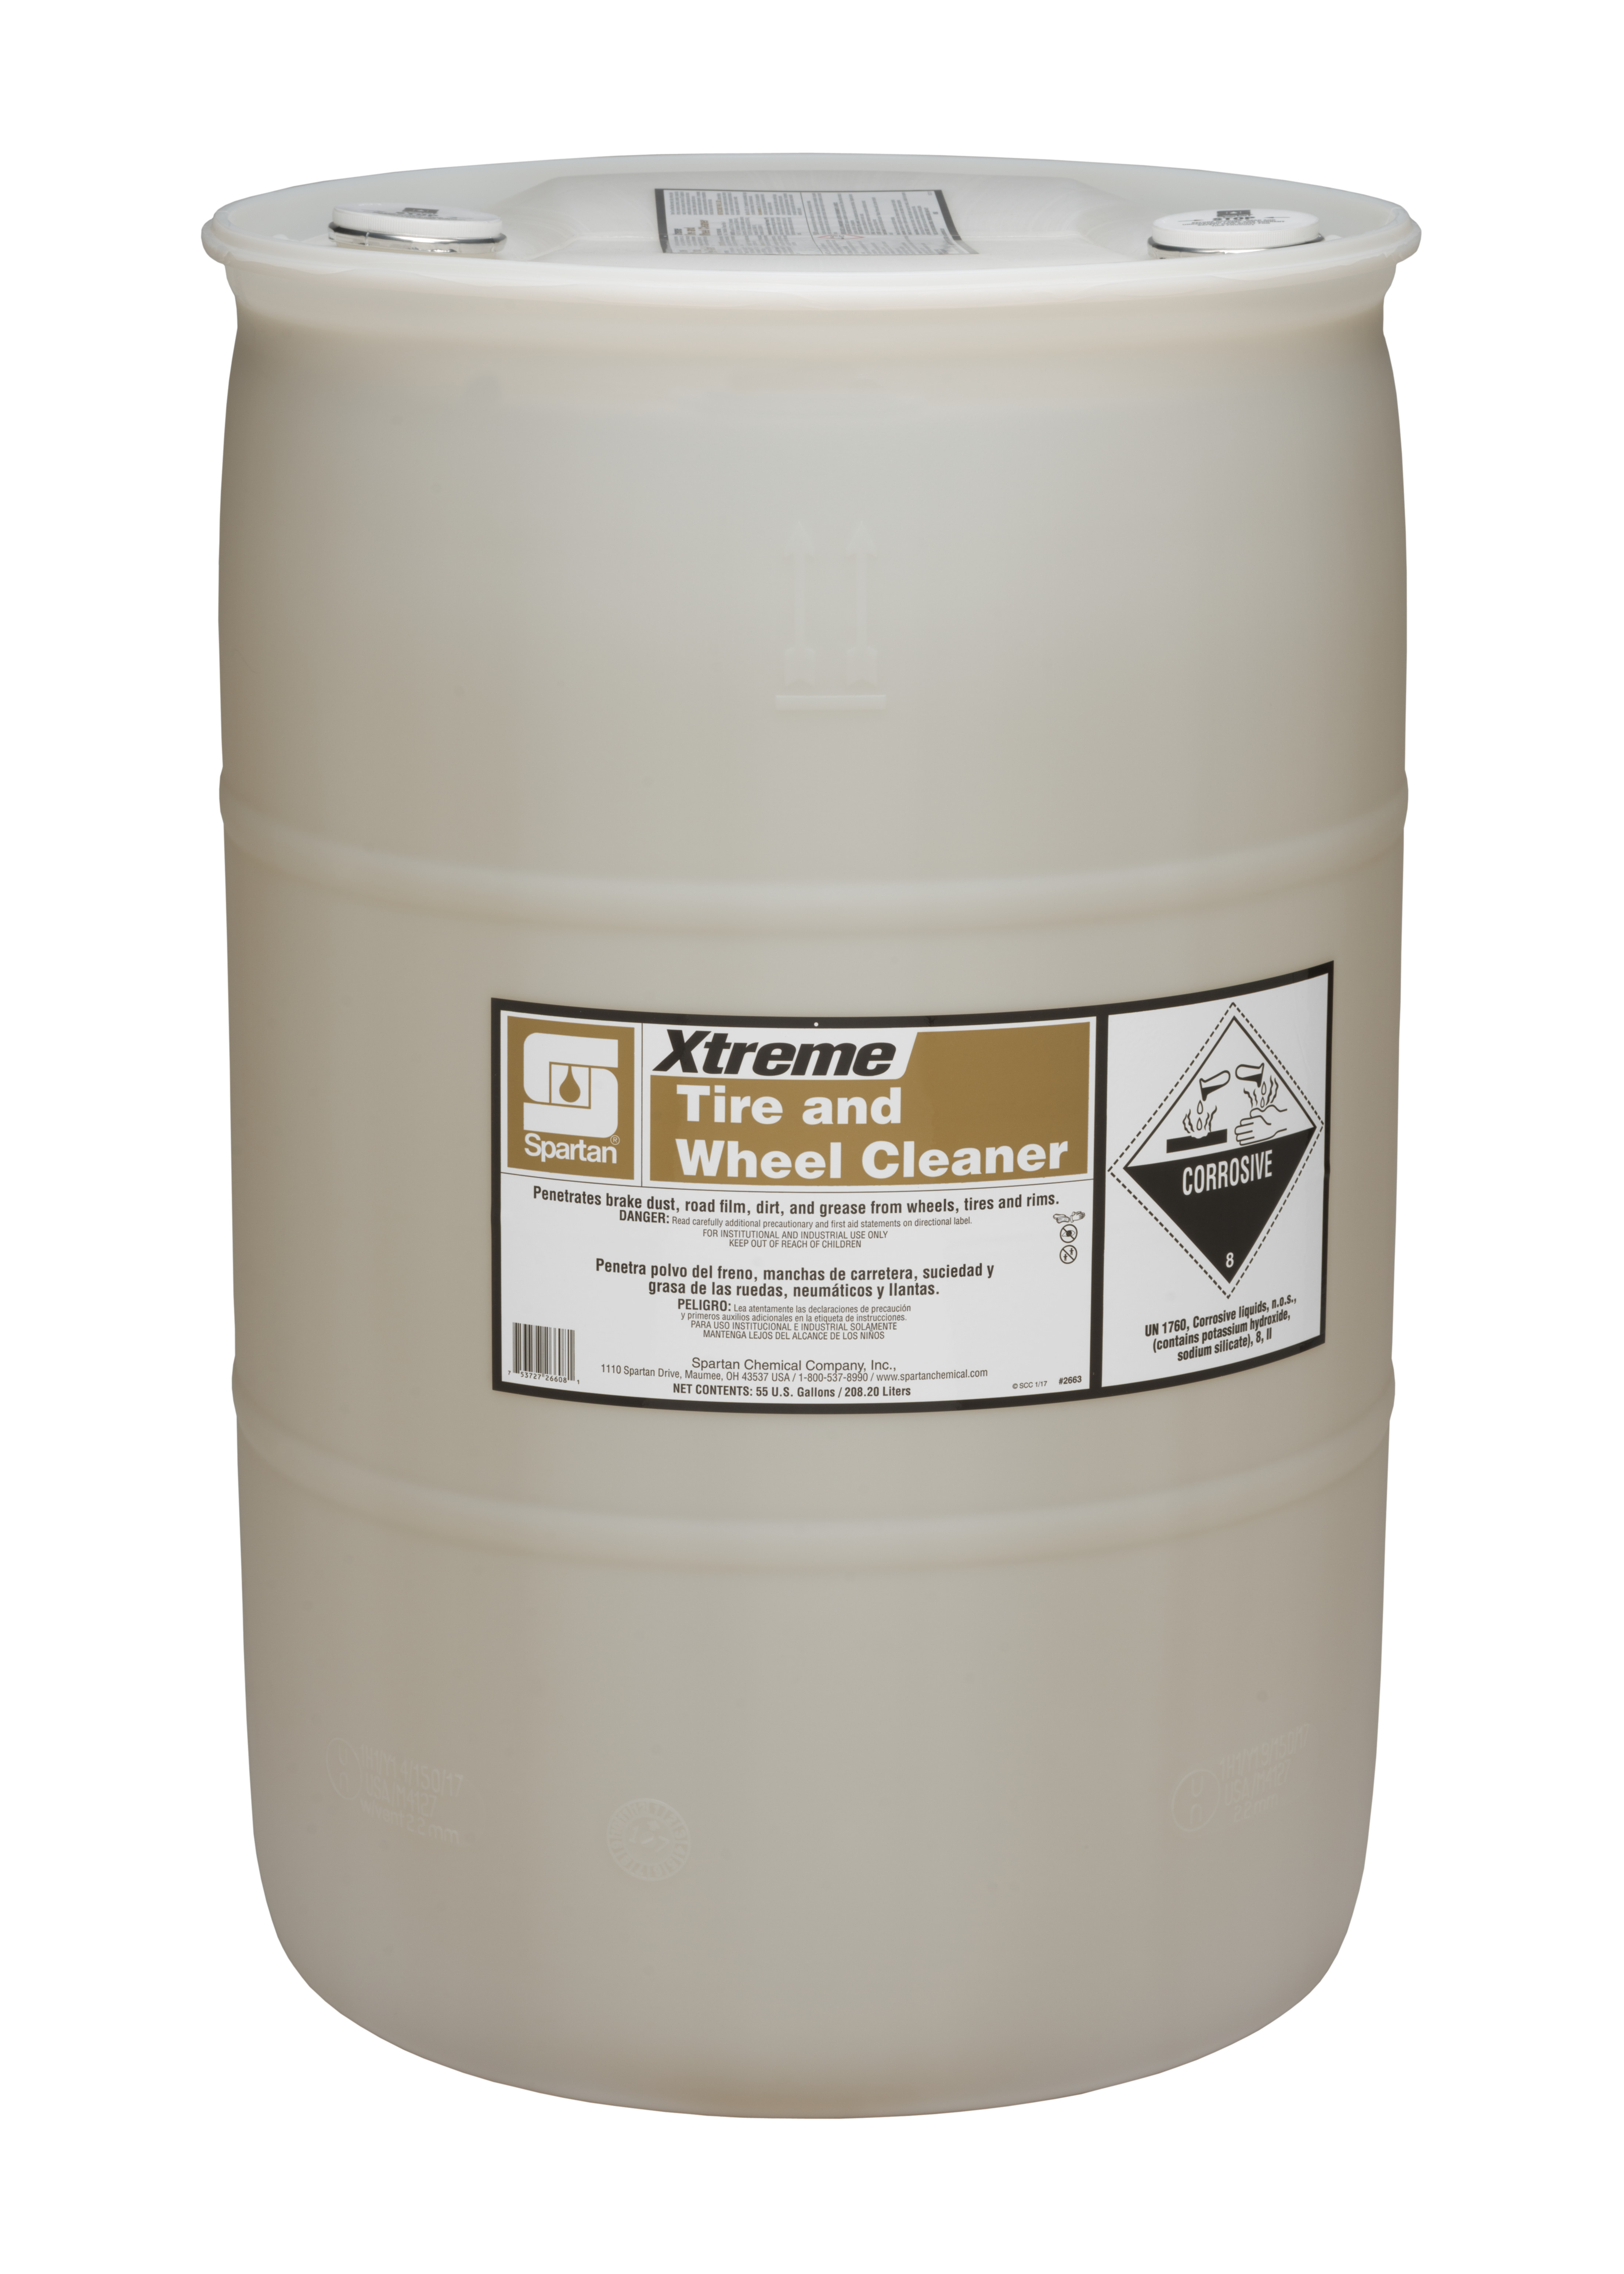 Spartan Chemical Company Xtreme Tire and Wheel Cleaner, 55 GAL DRUM